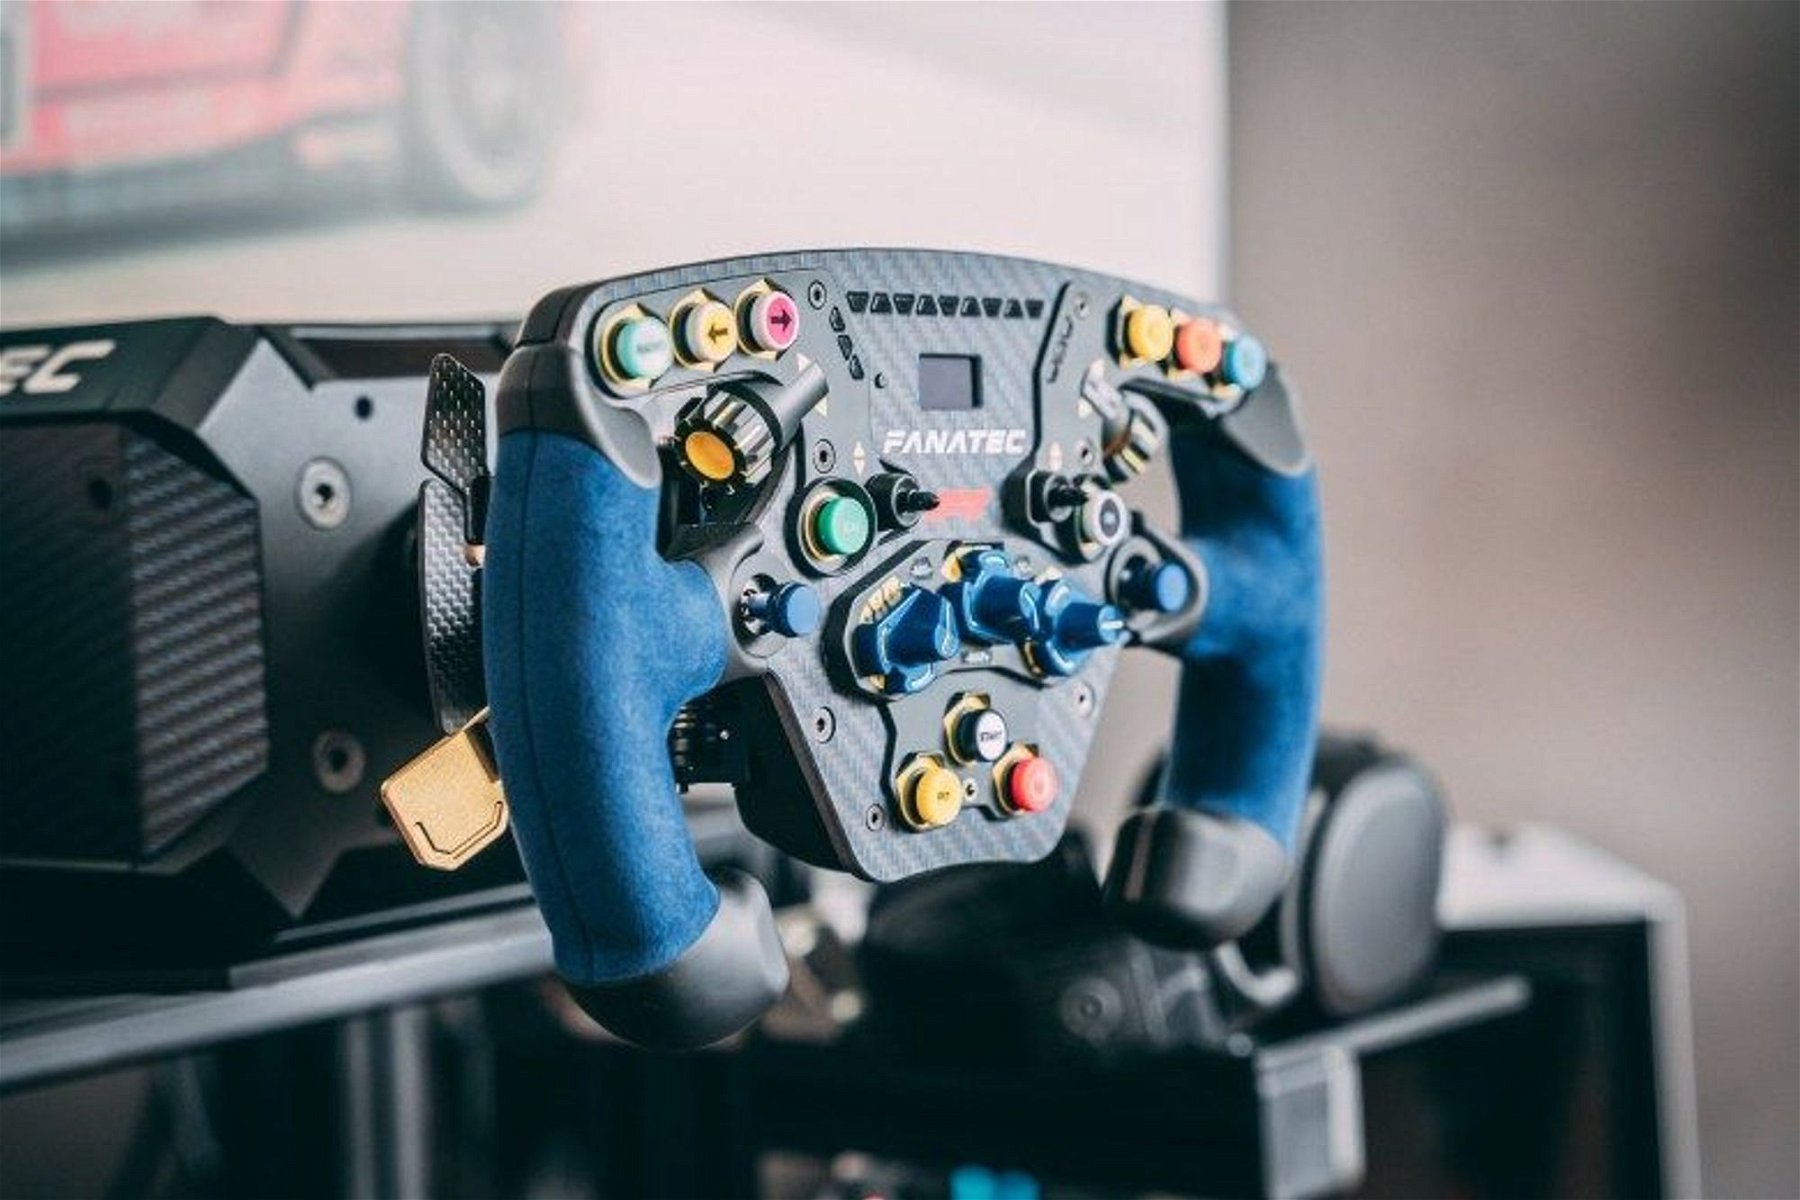 F1 Game Wheel and Pedal Setup Recommendations